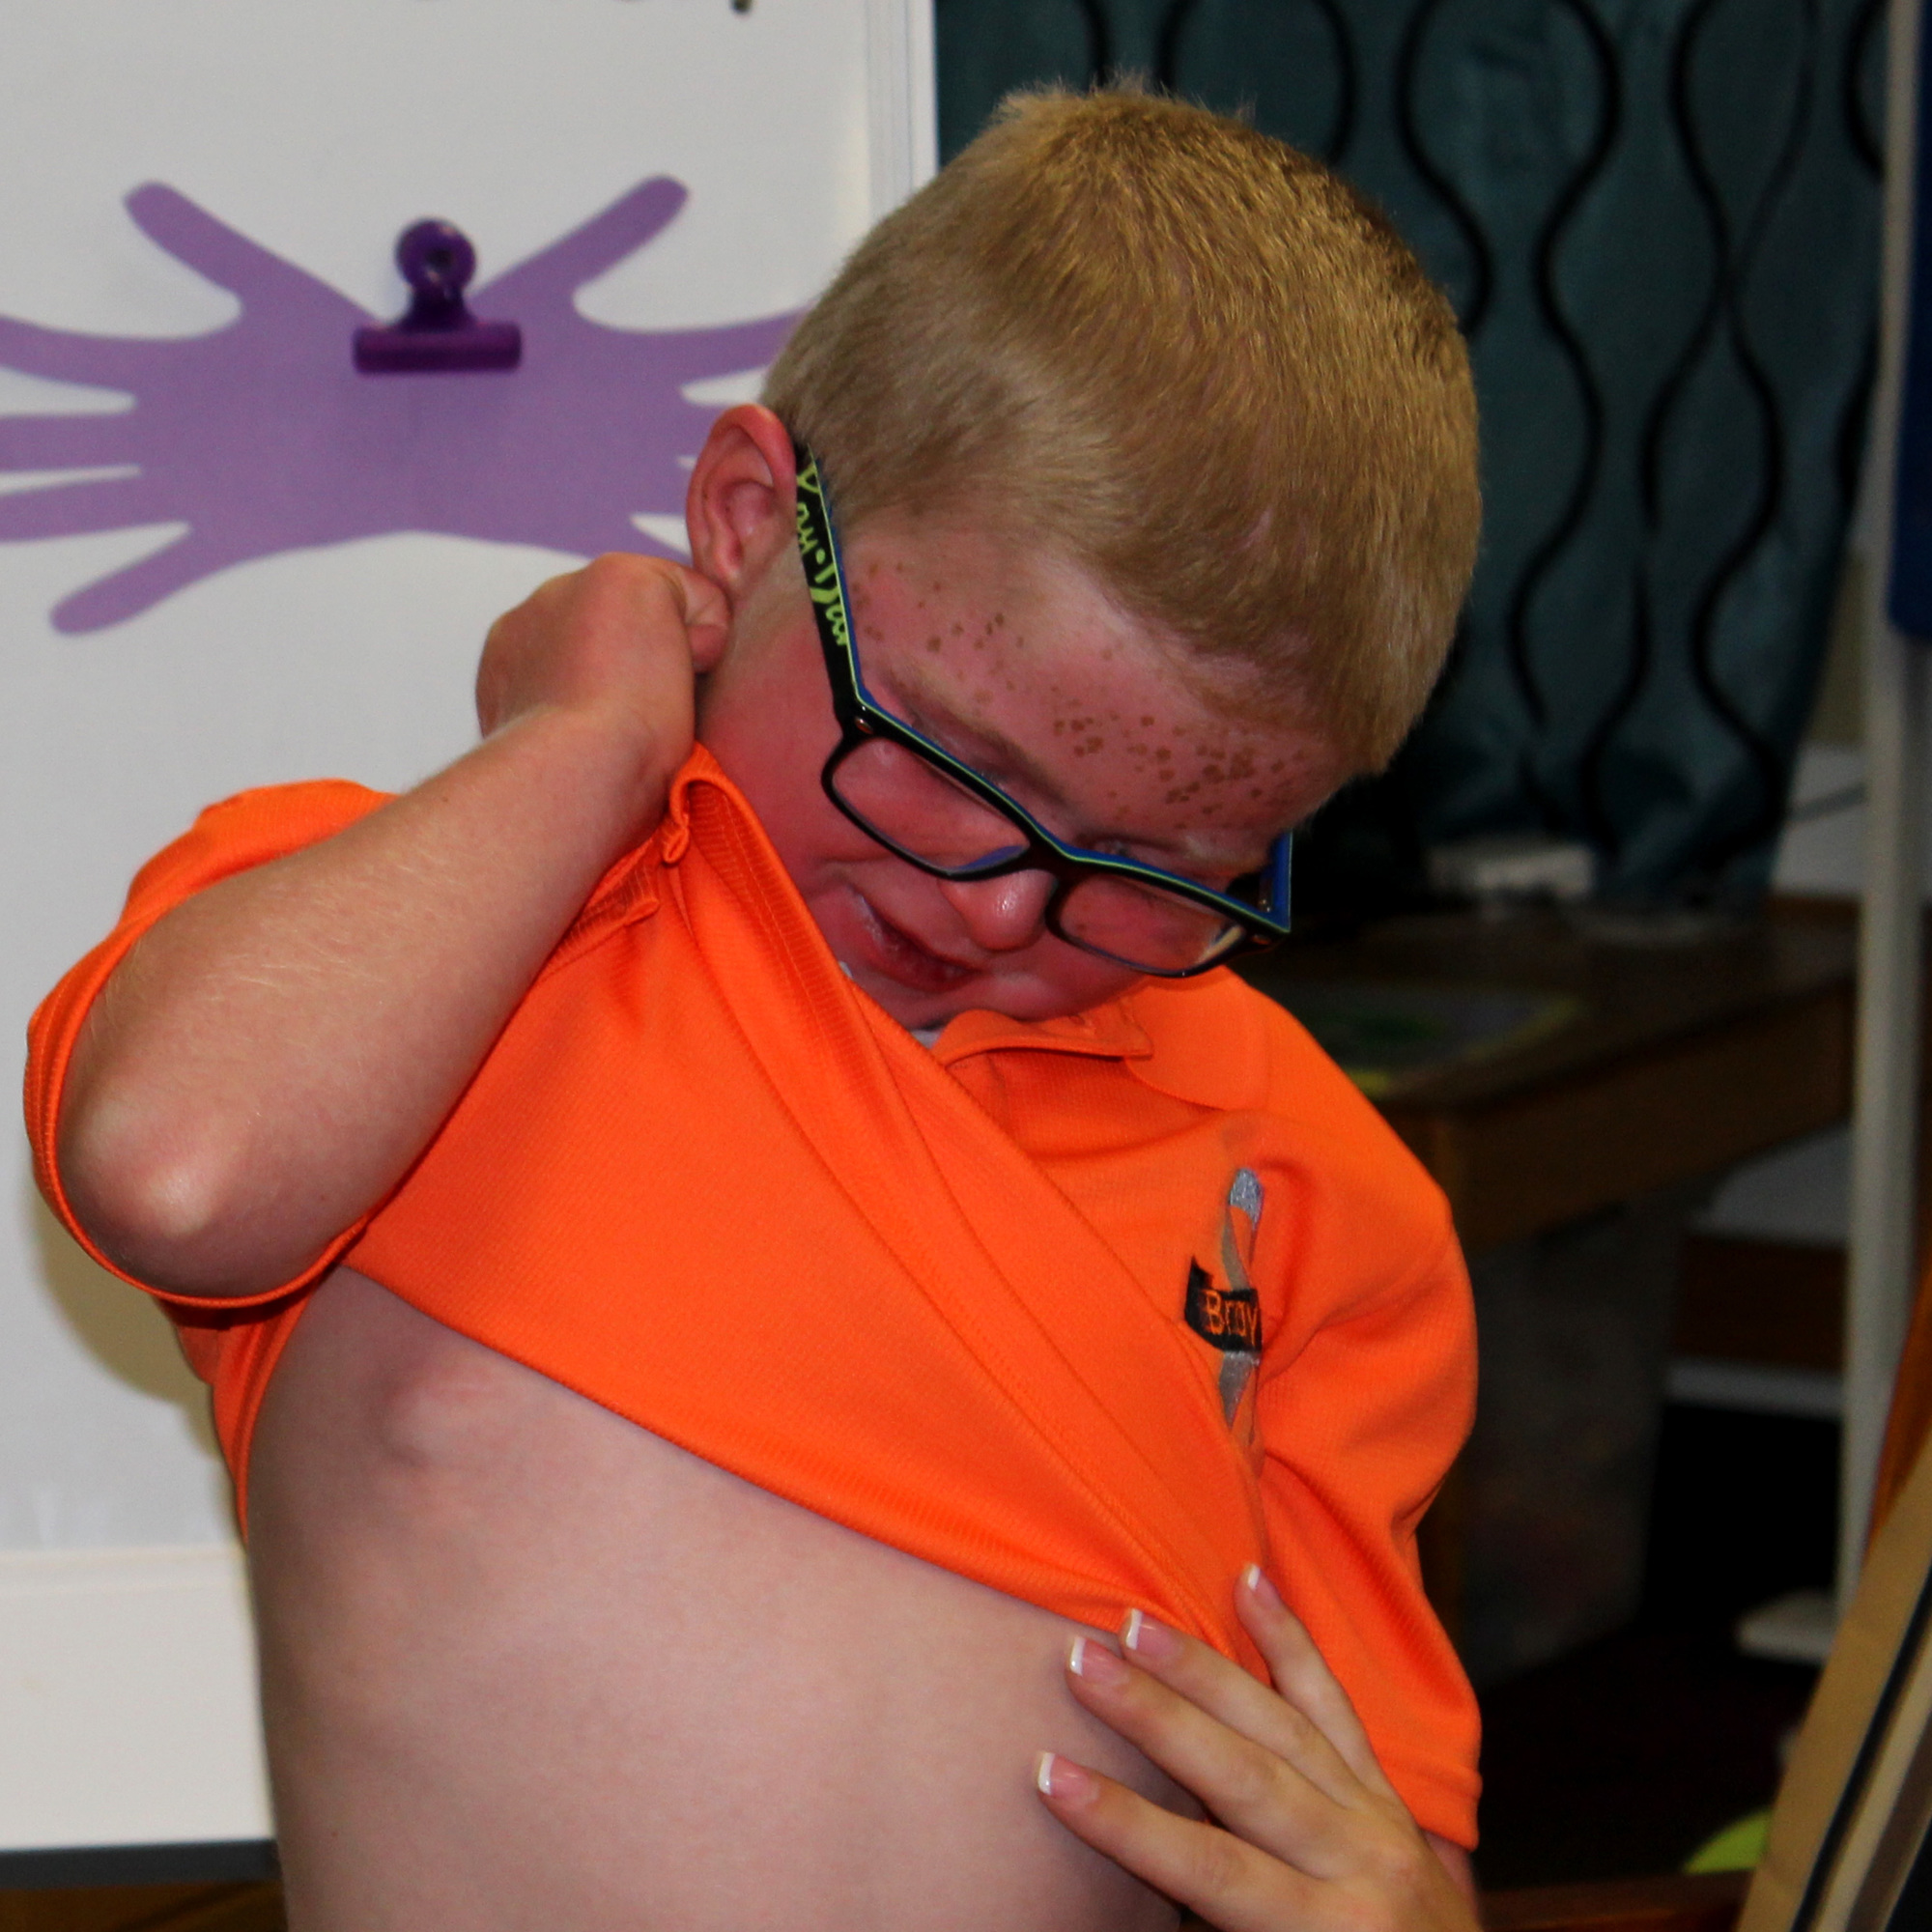 Brayden lifts his shirt to show what a port looks like. Photo by Jacque Estes